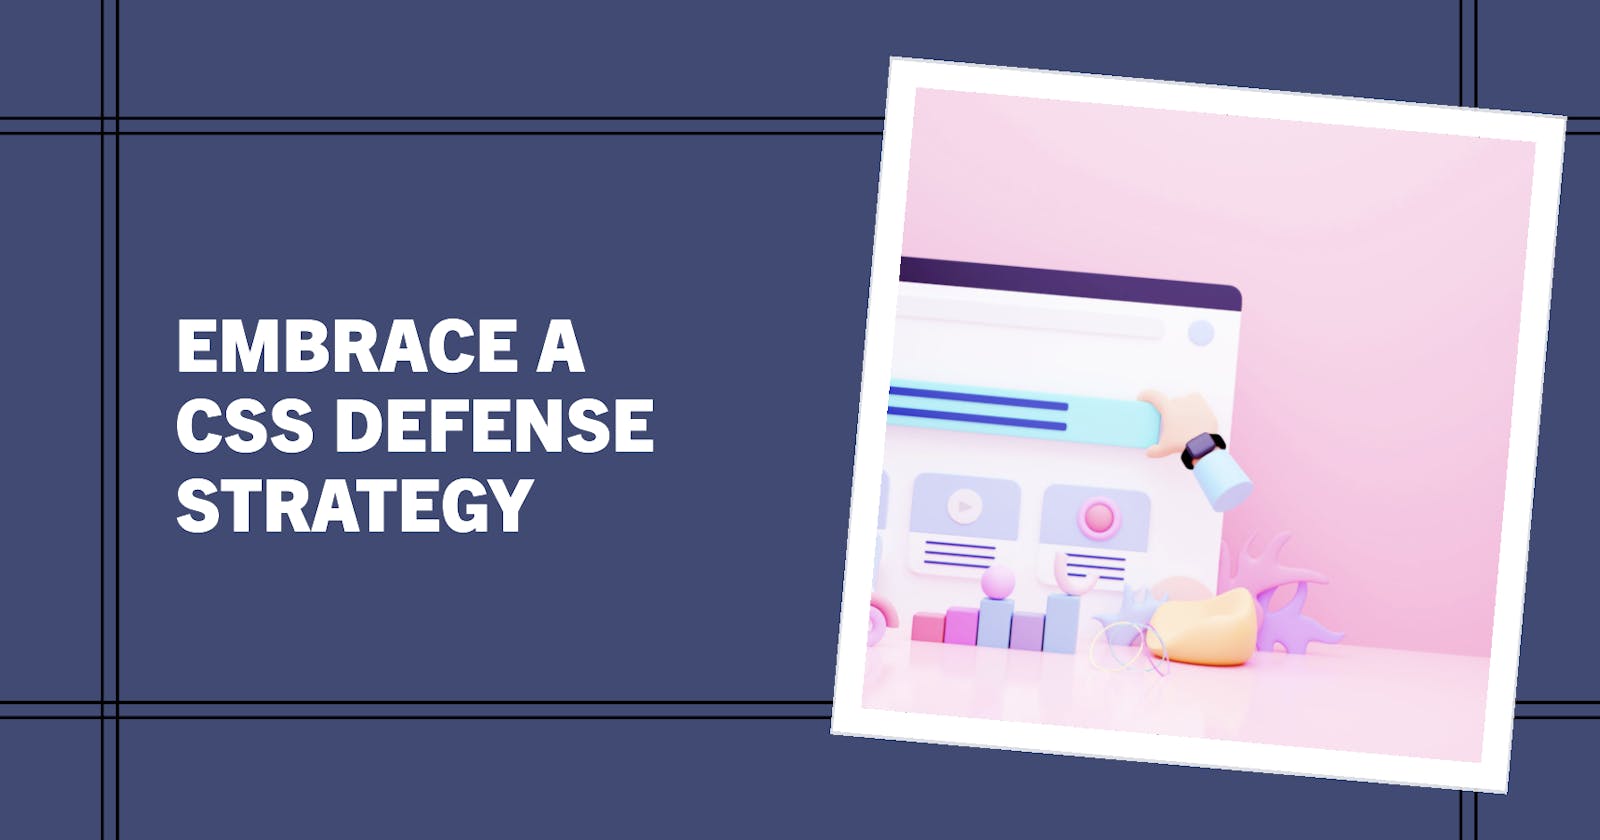 Embracing a CSS Defense Strategy